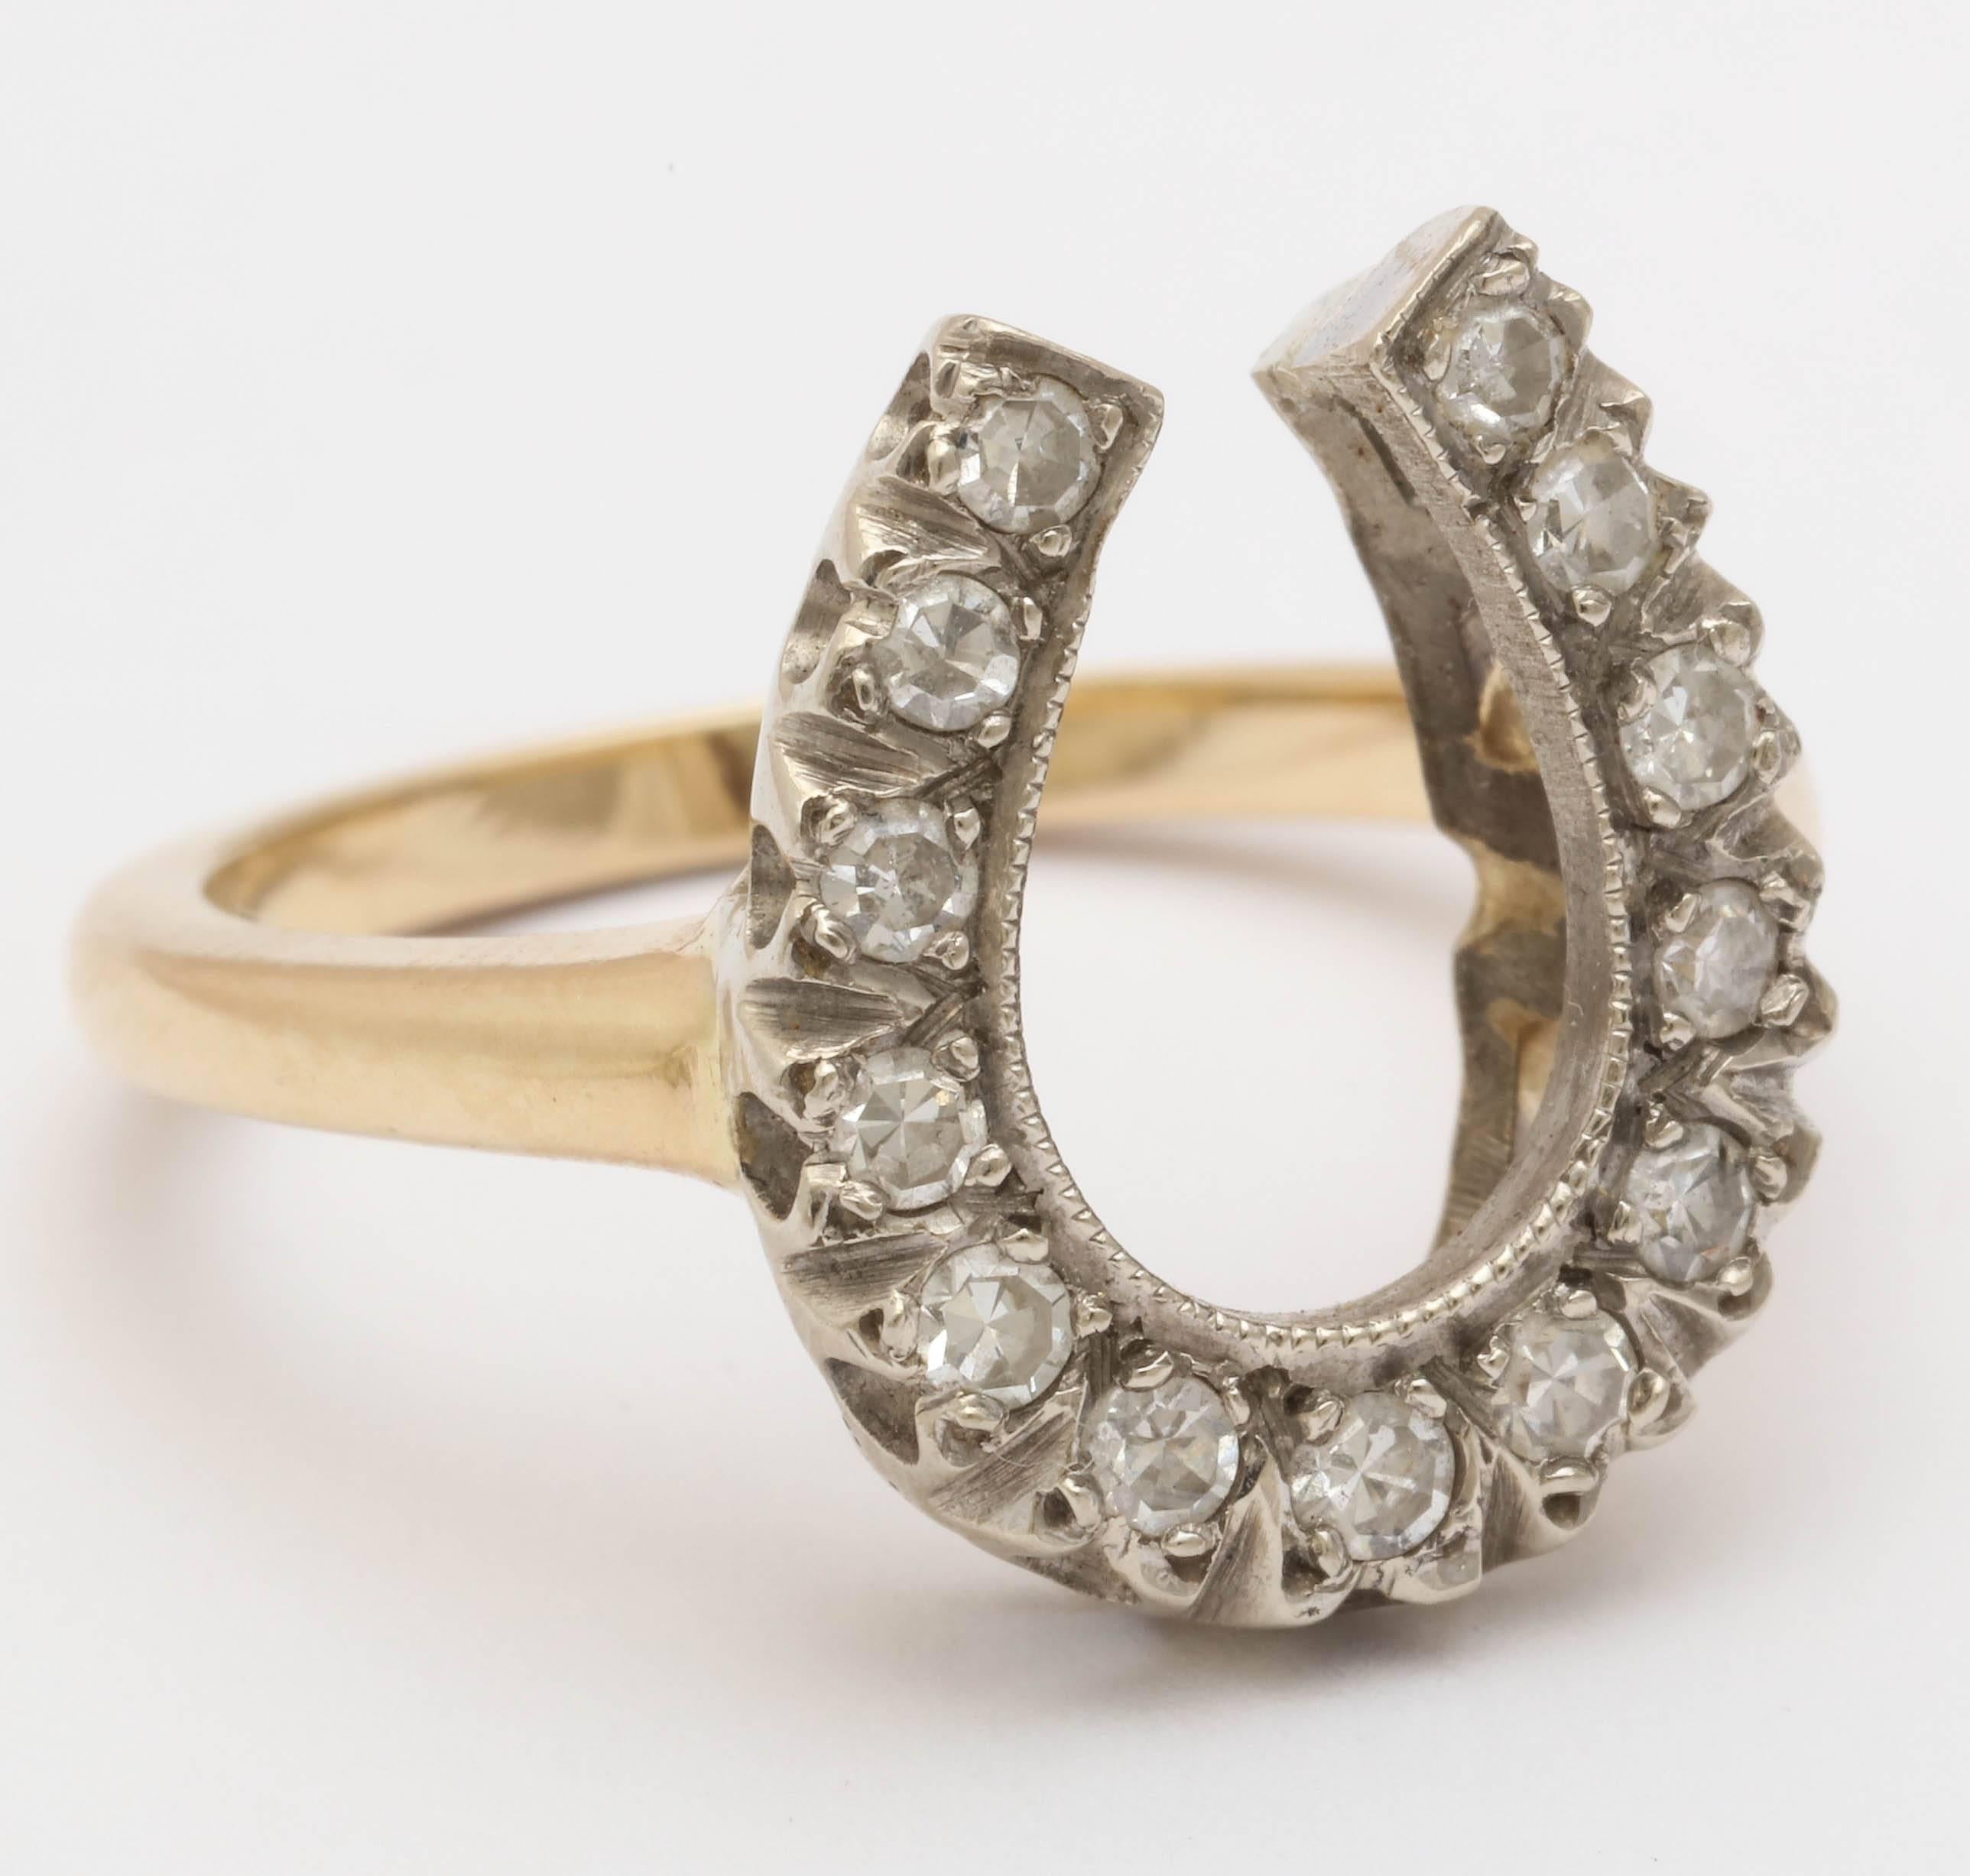 Beautiful silver on 10 karat yellow gold Victorian horseshoe ring. The horse shoe is set with 13 old cut diamonds. 